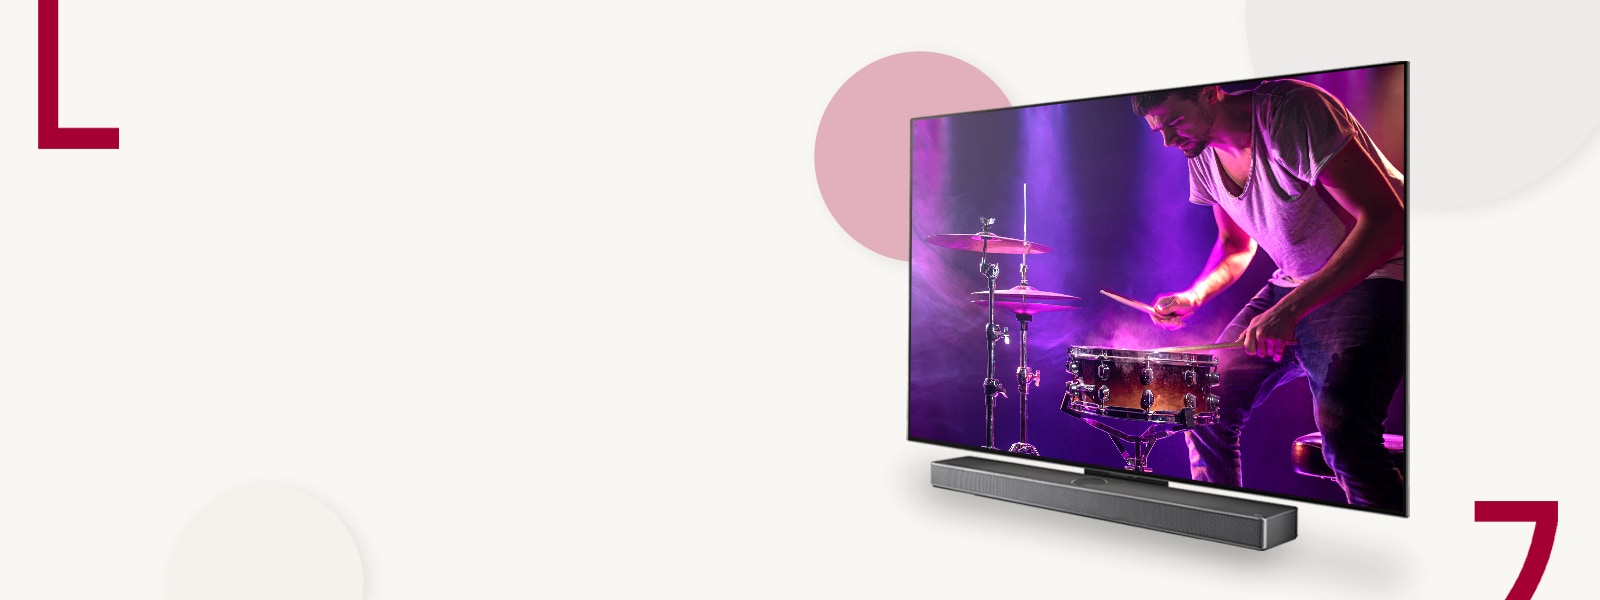 An image of LG OLED C3 and the Soundbar against  a cream backdrop with colored circles. A man playing the drums is on screen.